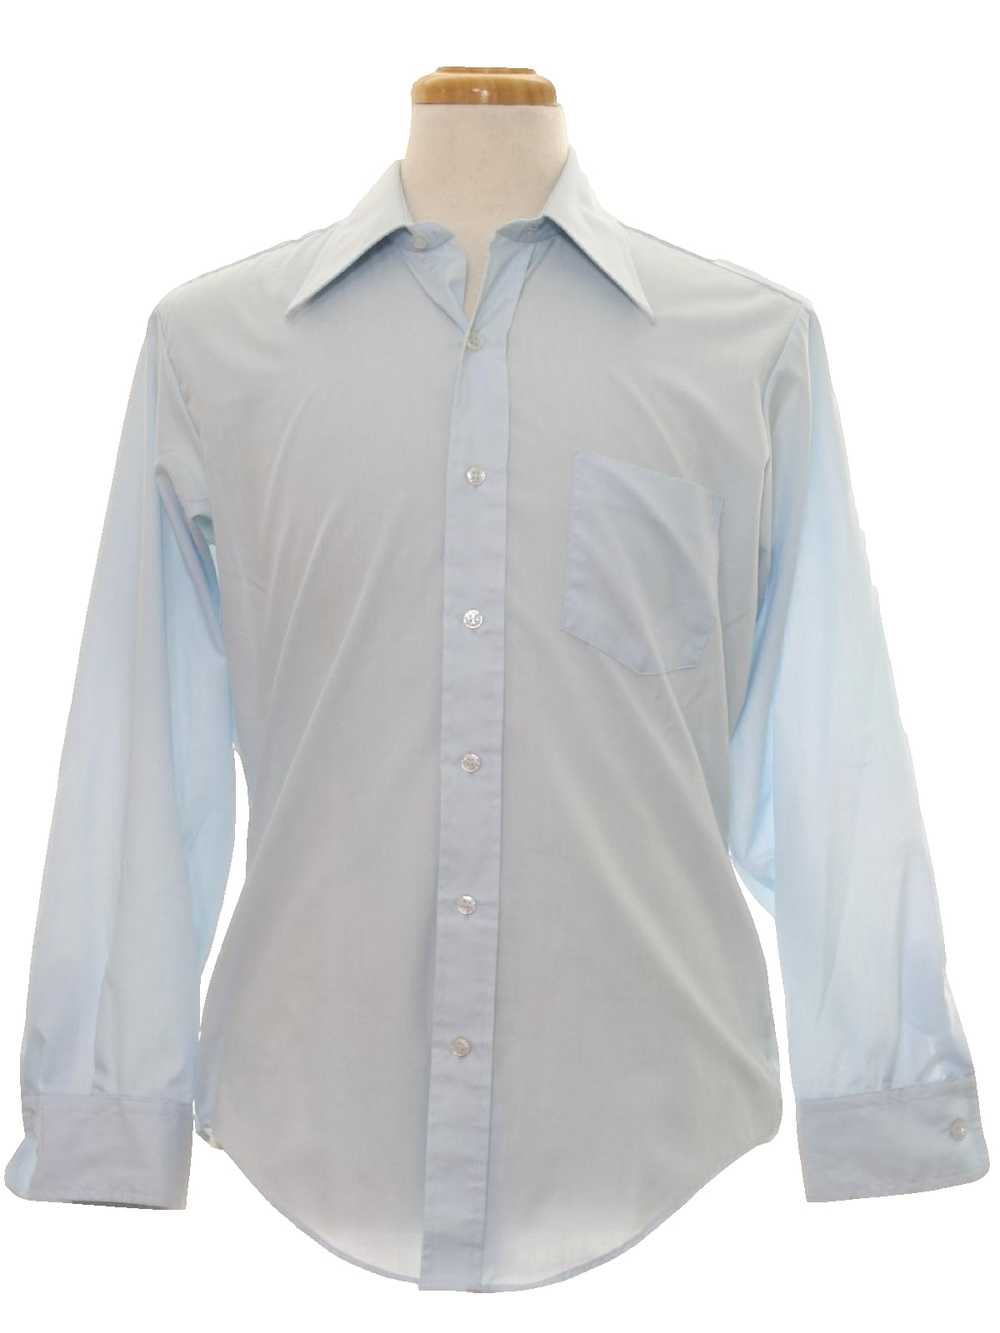 1970's JCPenney Mens Shirt - image 1